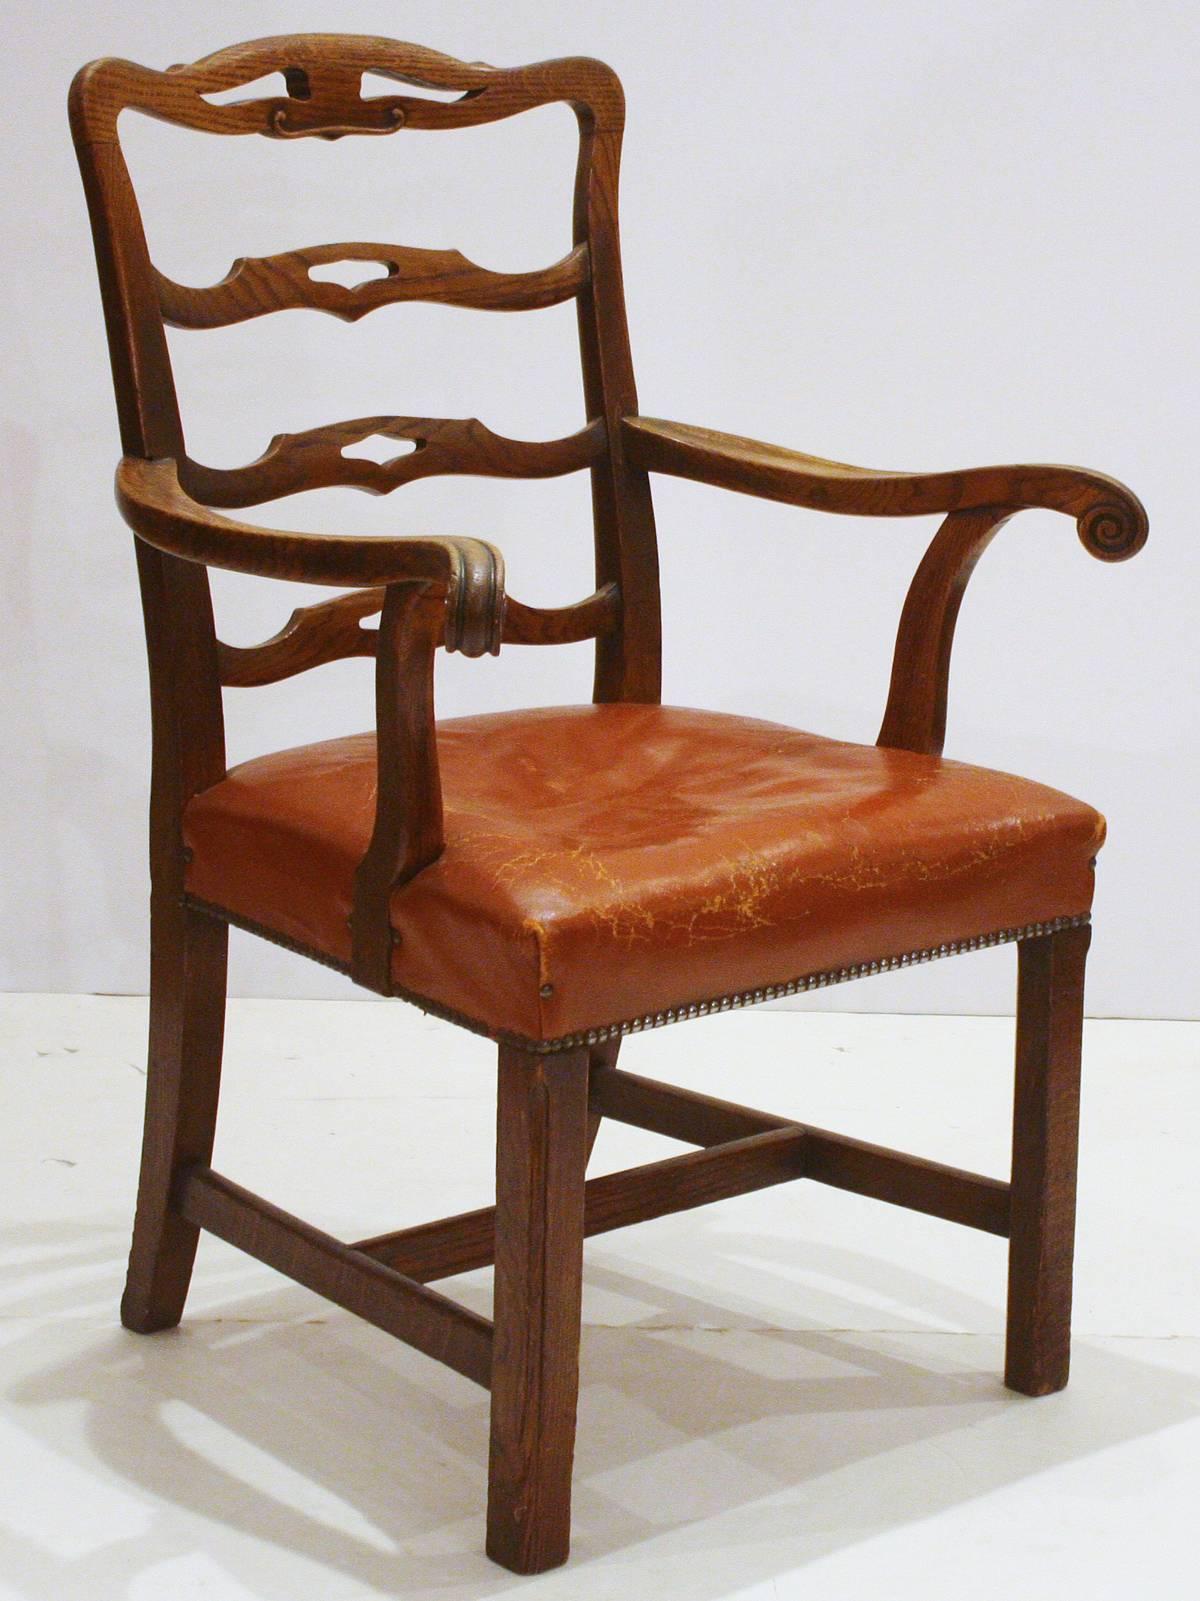 an English host / armchair with pierced rung ladderback and straight Marlborough legs (H-stretcher), British tan saddle leather seat upholstered over the rail with nailhead trim, probably made of elm, walnut colored, country Chippendale-style chair